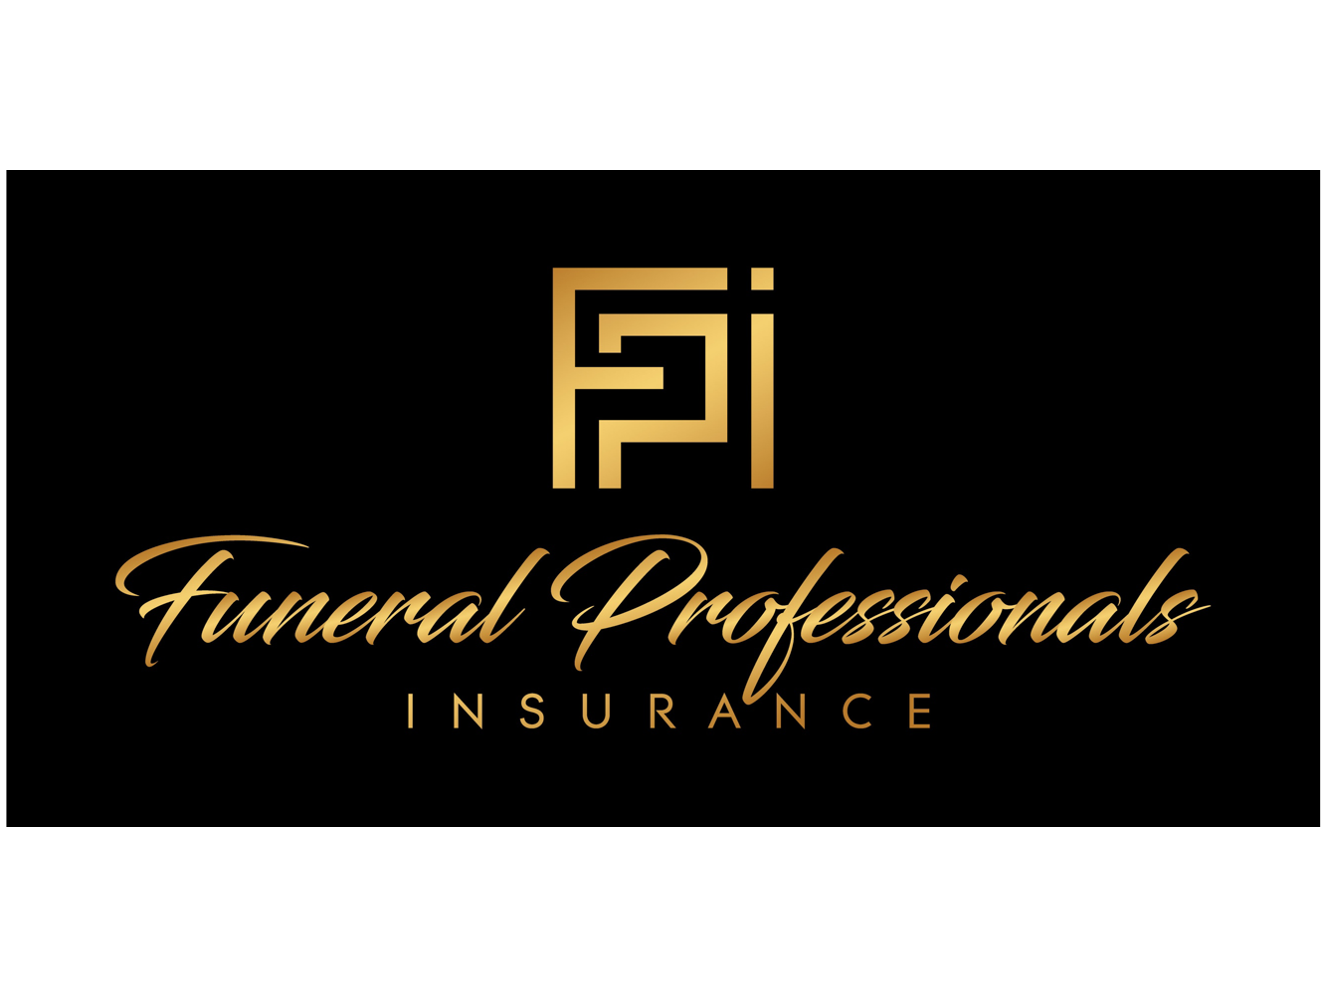 Funeral Professionals Insurance